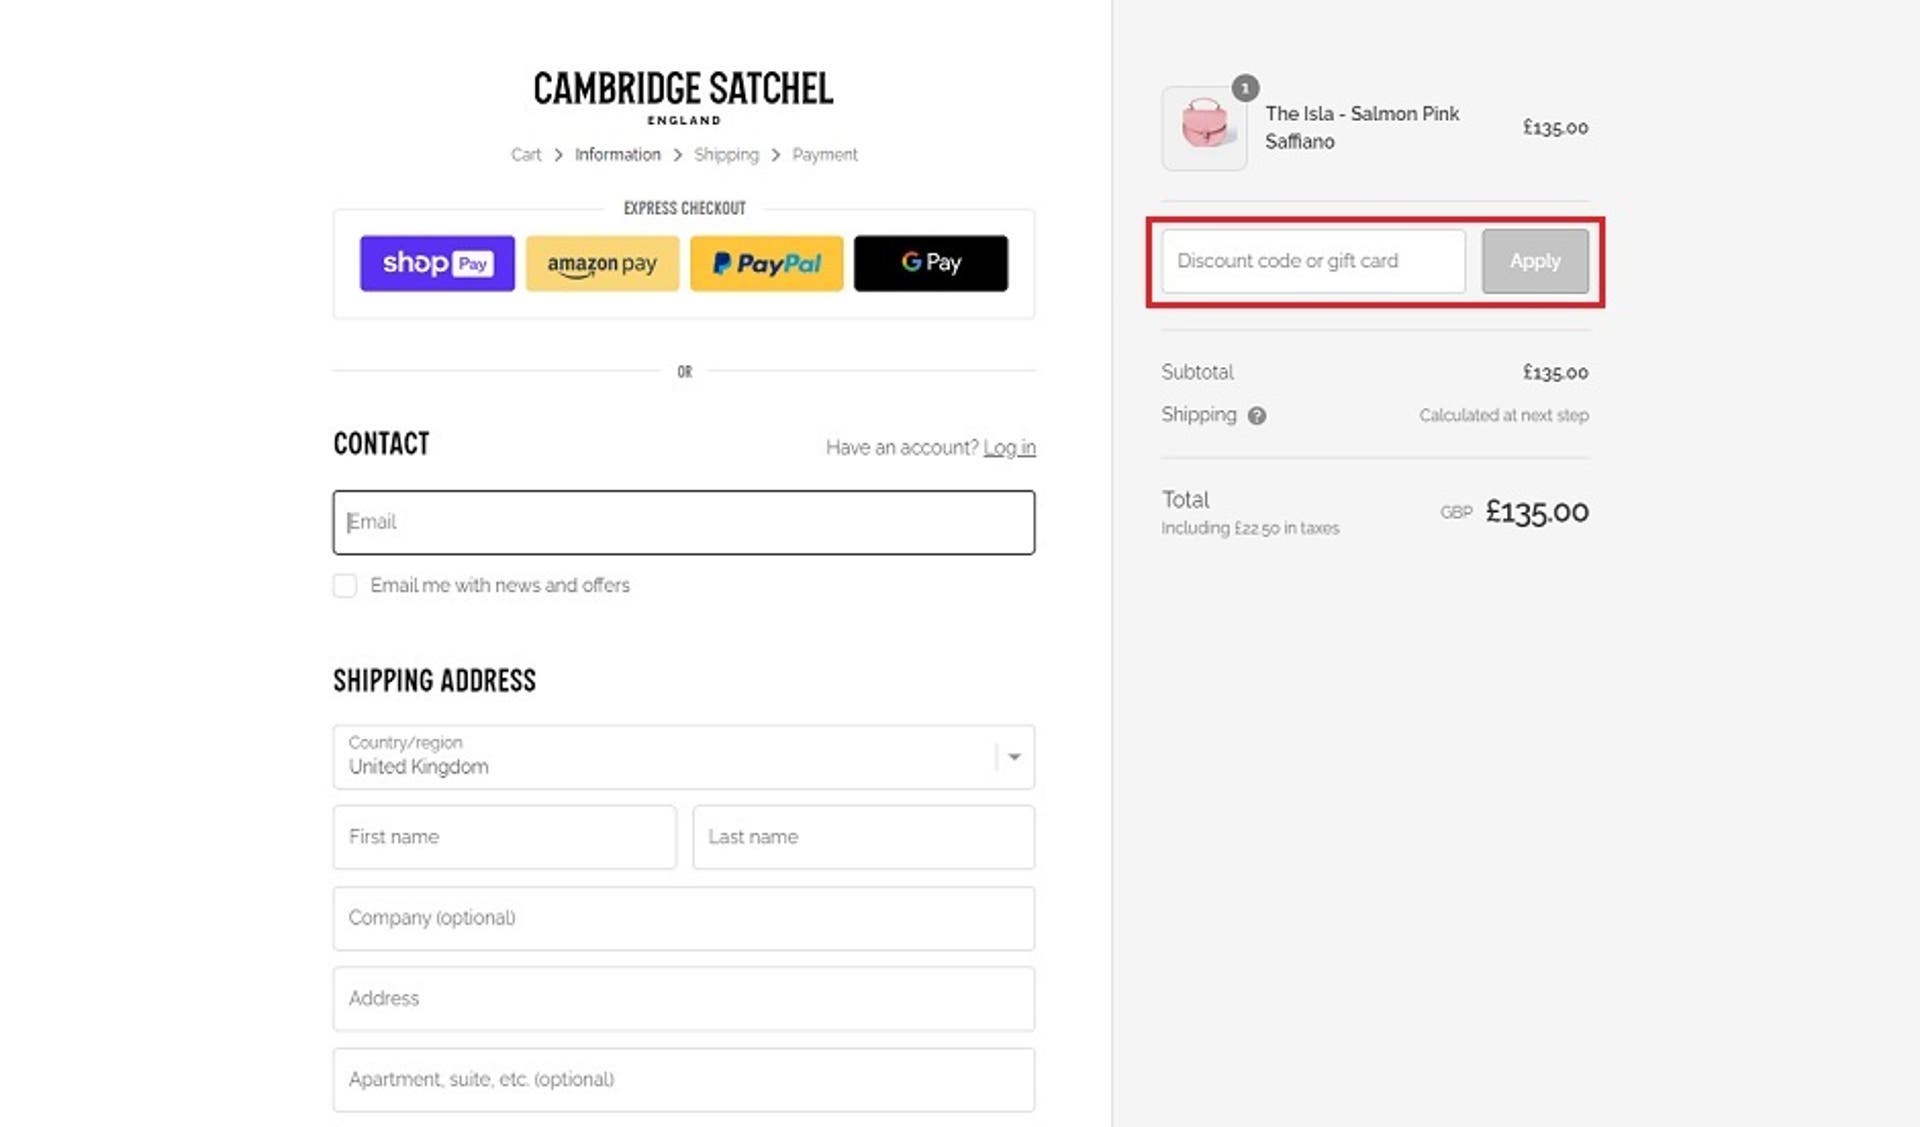  A screenshot of the Cambridge Satchel website showing users how to use their discount codes with the 'Discount code or gift card' box highlighted. 